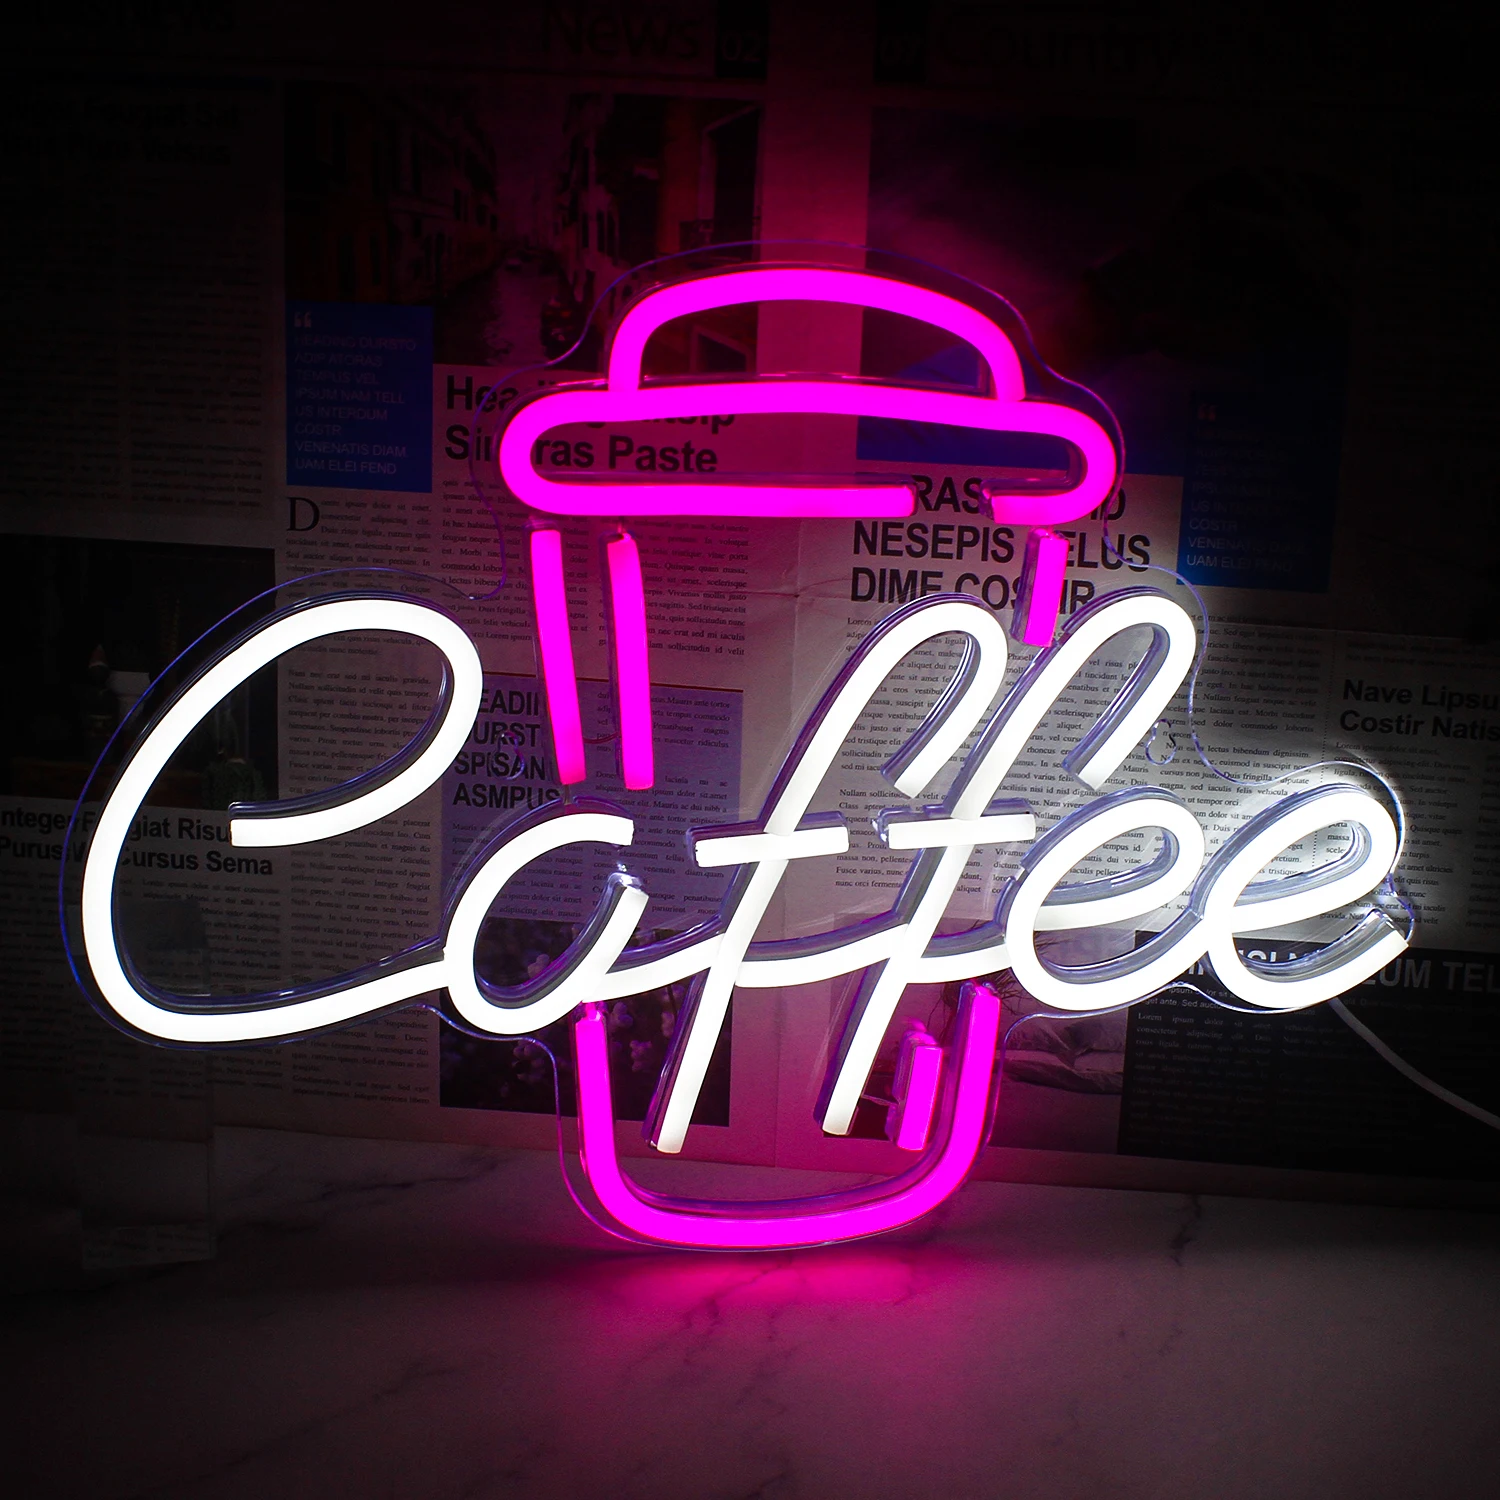 

Coffee Neon Sign Pink White LED Word Neon Lights for Cafe Bar Resturant USB Neon for Wall Decor Beer Pub Bedroom Birthday Party